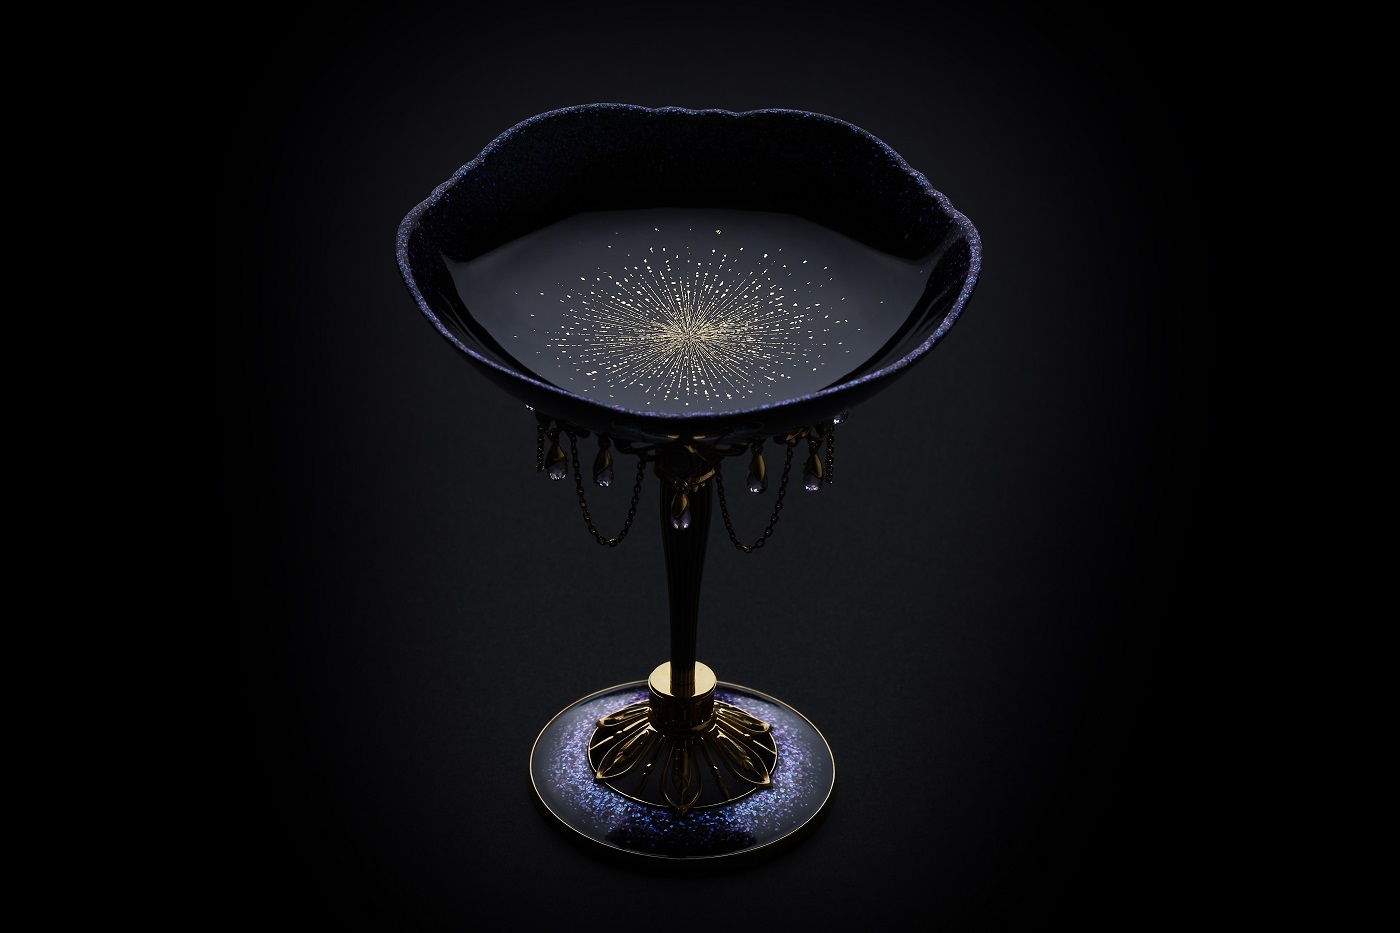 Stemmed Goblet with Inlaid Gold and Mother-of-pearl, 